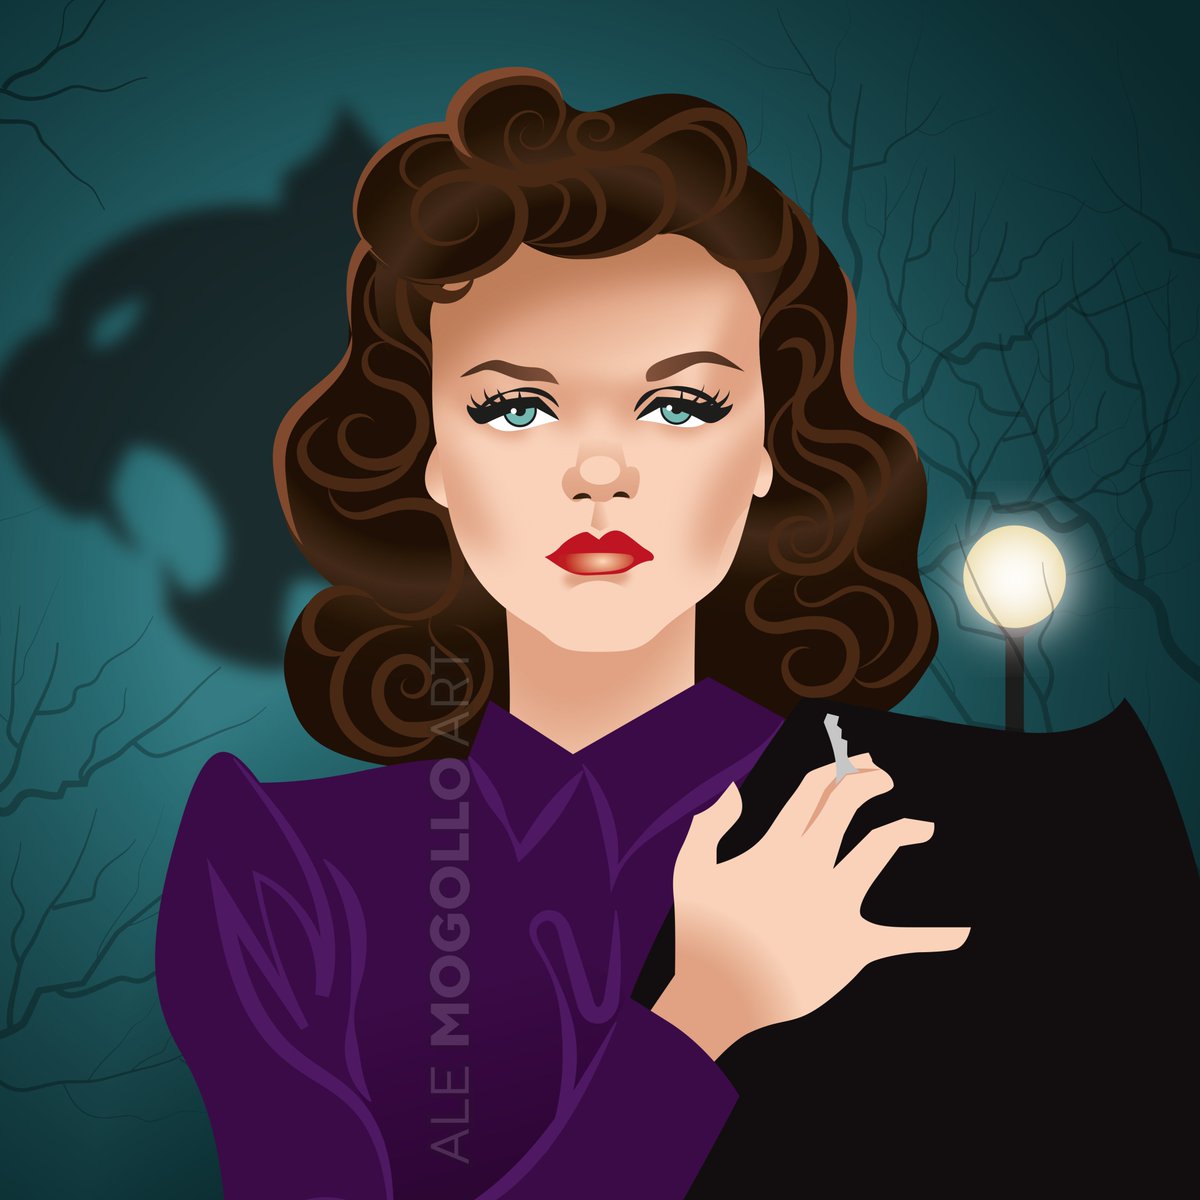 Remembering french actress Simone Simon on her birthday. Here as Irena Dubrovna in cult horror classic Cat People, by Jacques Tourneur. Have you seen it?
#simonesimon #catpeople #jacquestourneur #cultclassic #oldhollywood #halloween #TCMParty #halloweenart #AlejandroMogolloArt